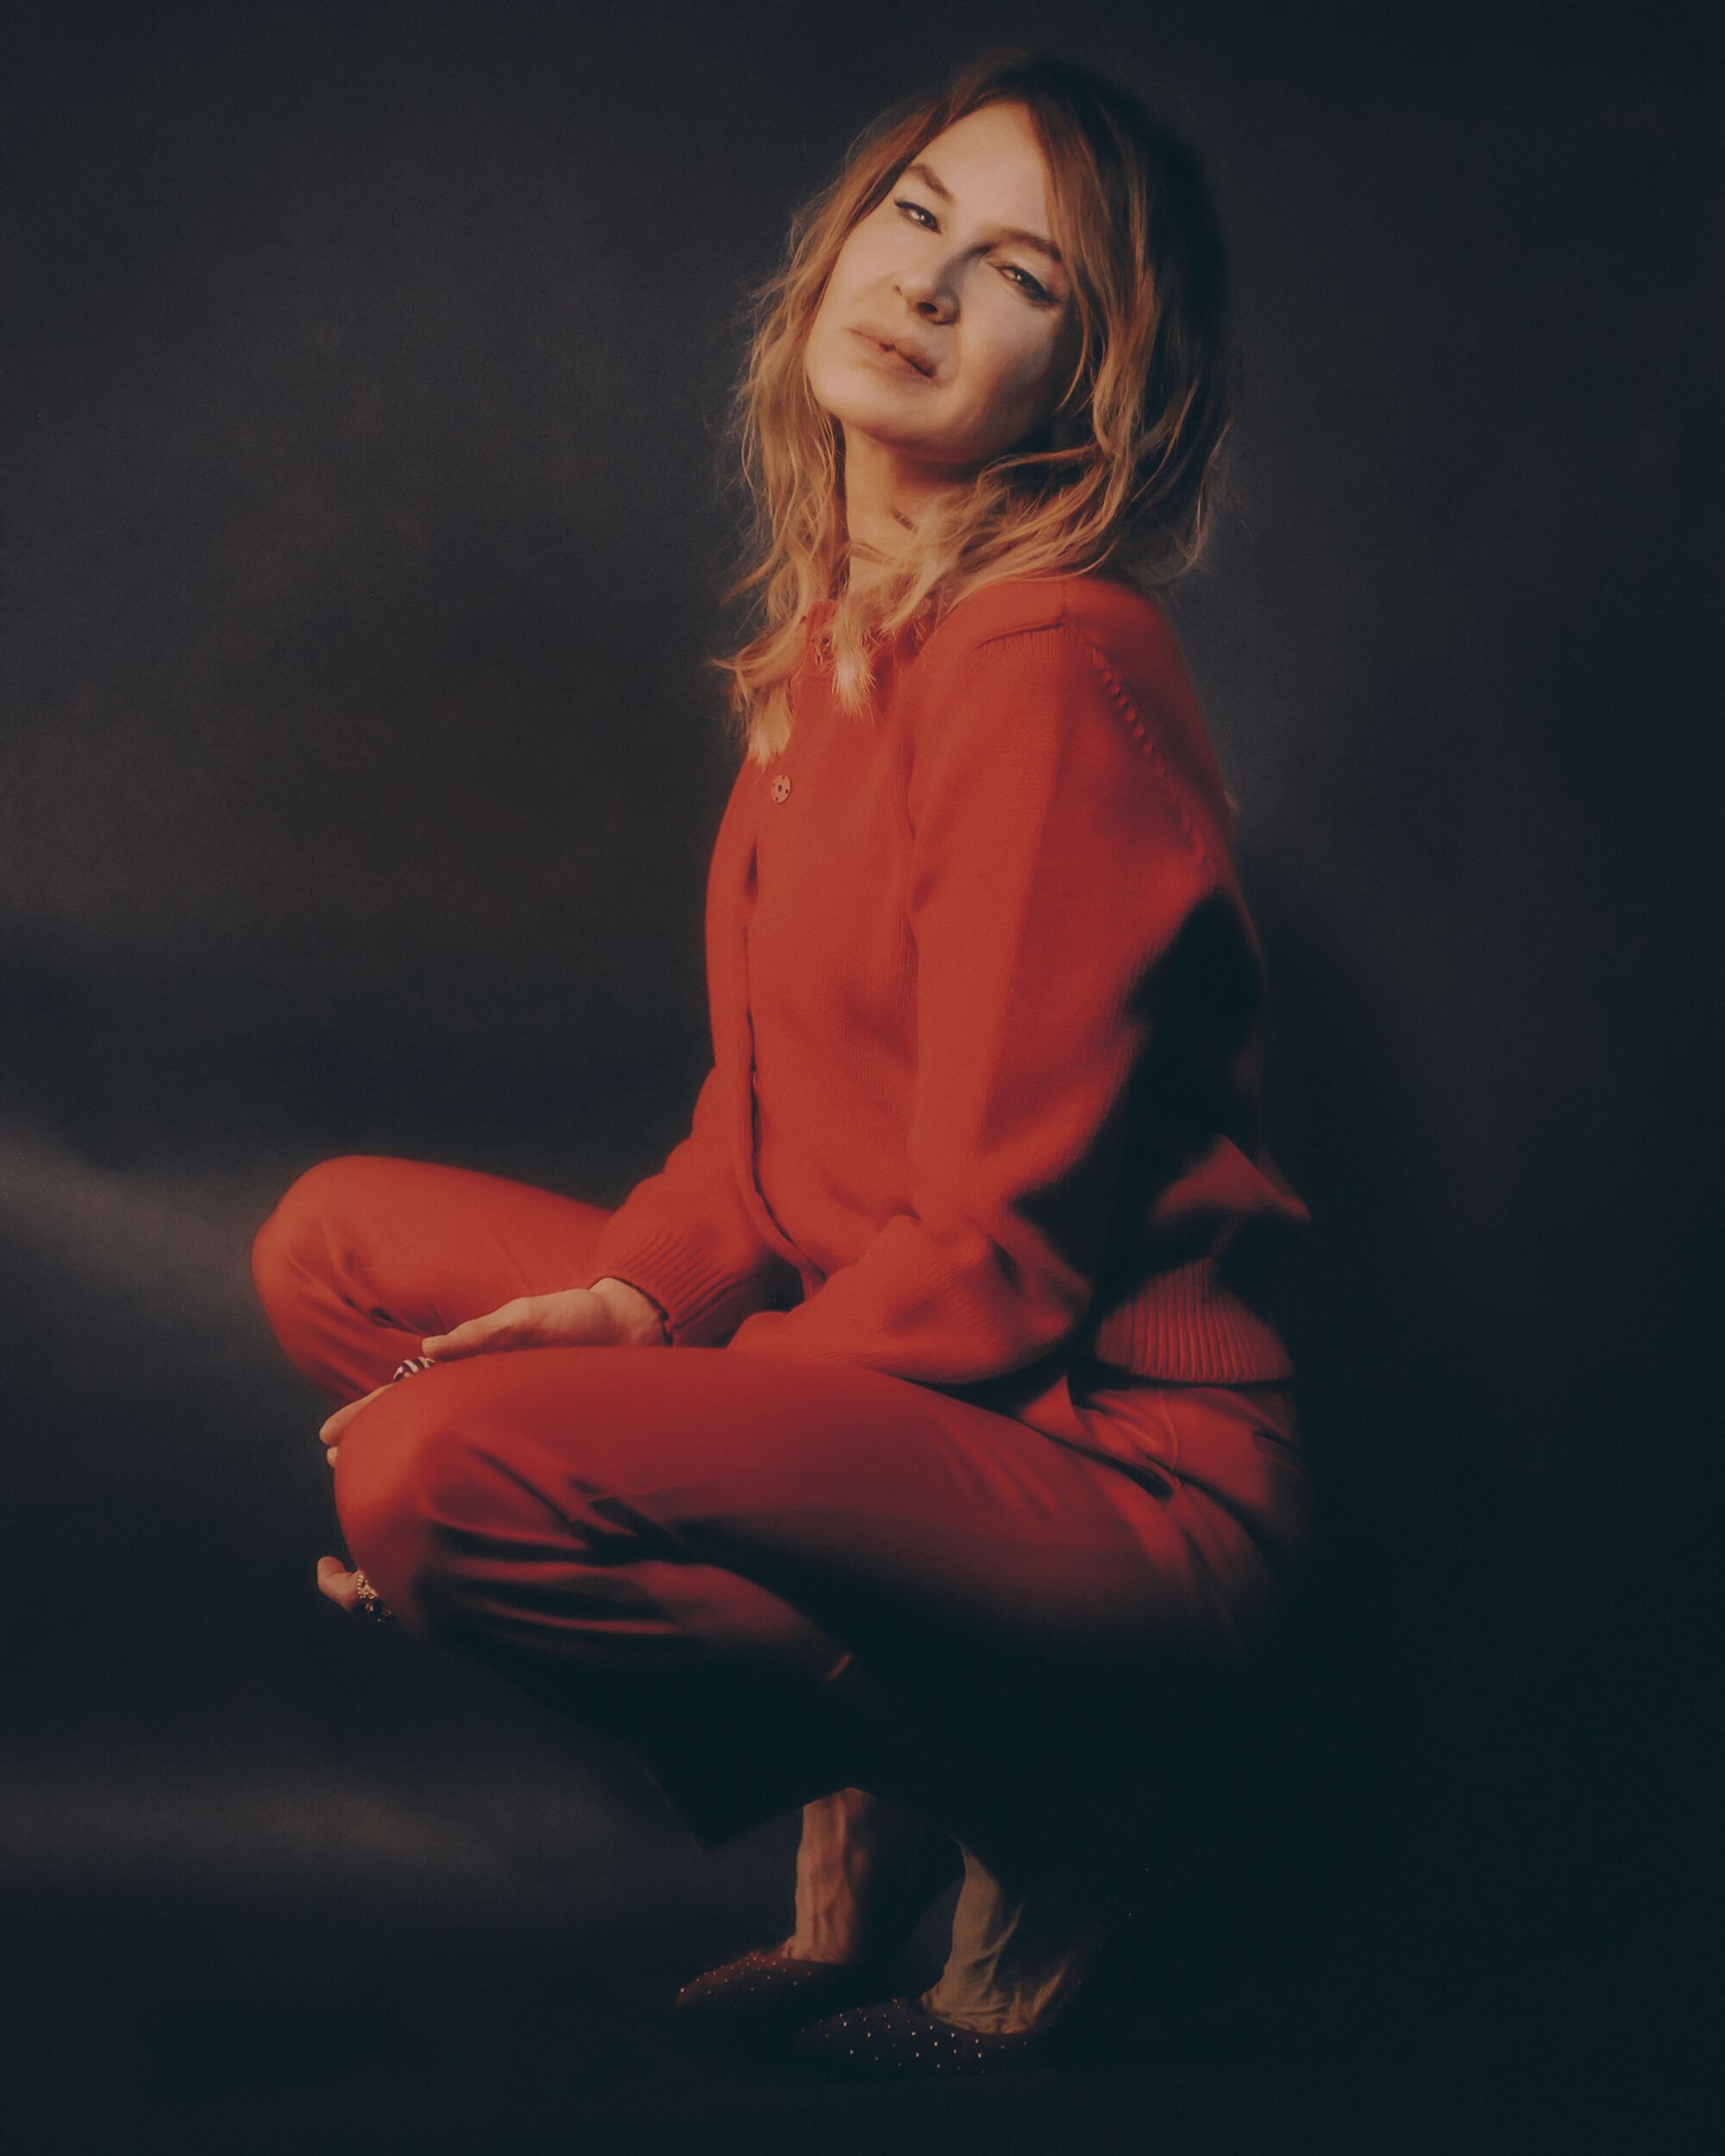 A woman in a red outfit poses for a portrait while squatting